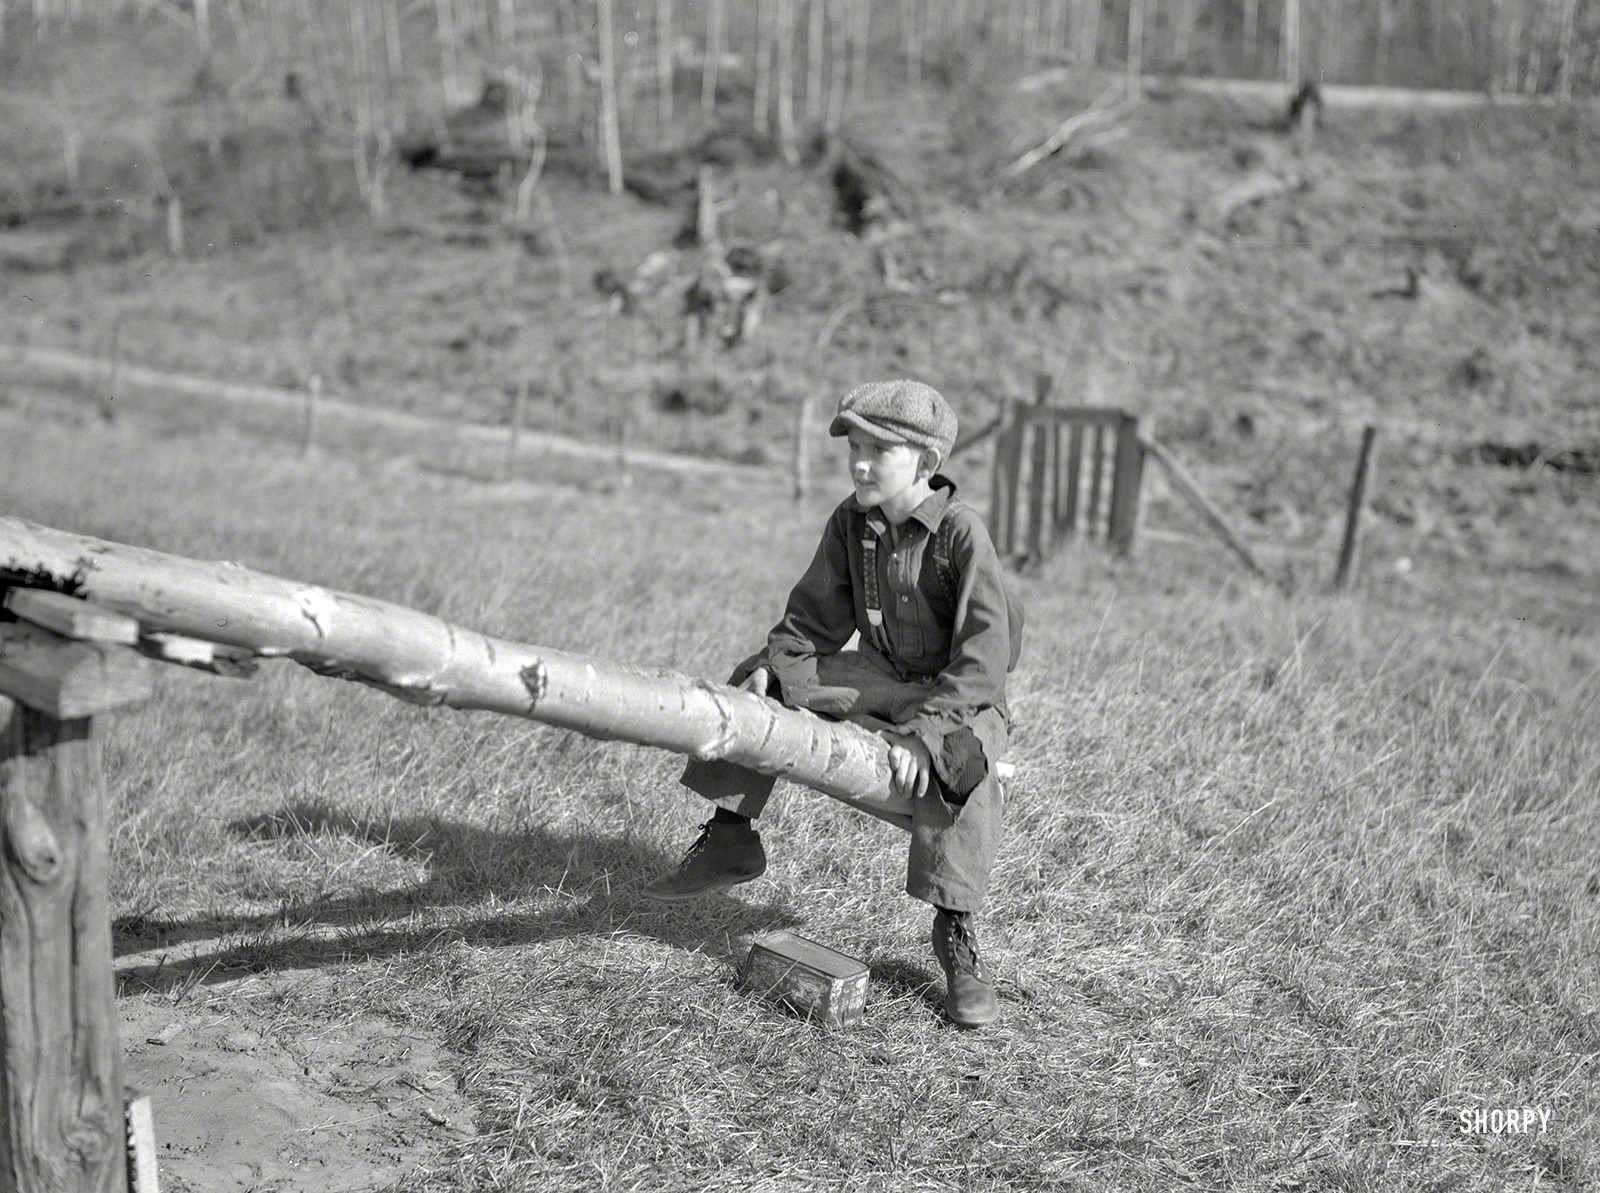 May 1937. "One of Max Sparks' children playing on homemade teeter-totter near Long Lake, Wisconsin." Medium format negative by Russell Lee. View full size.